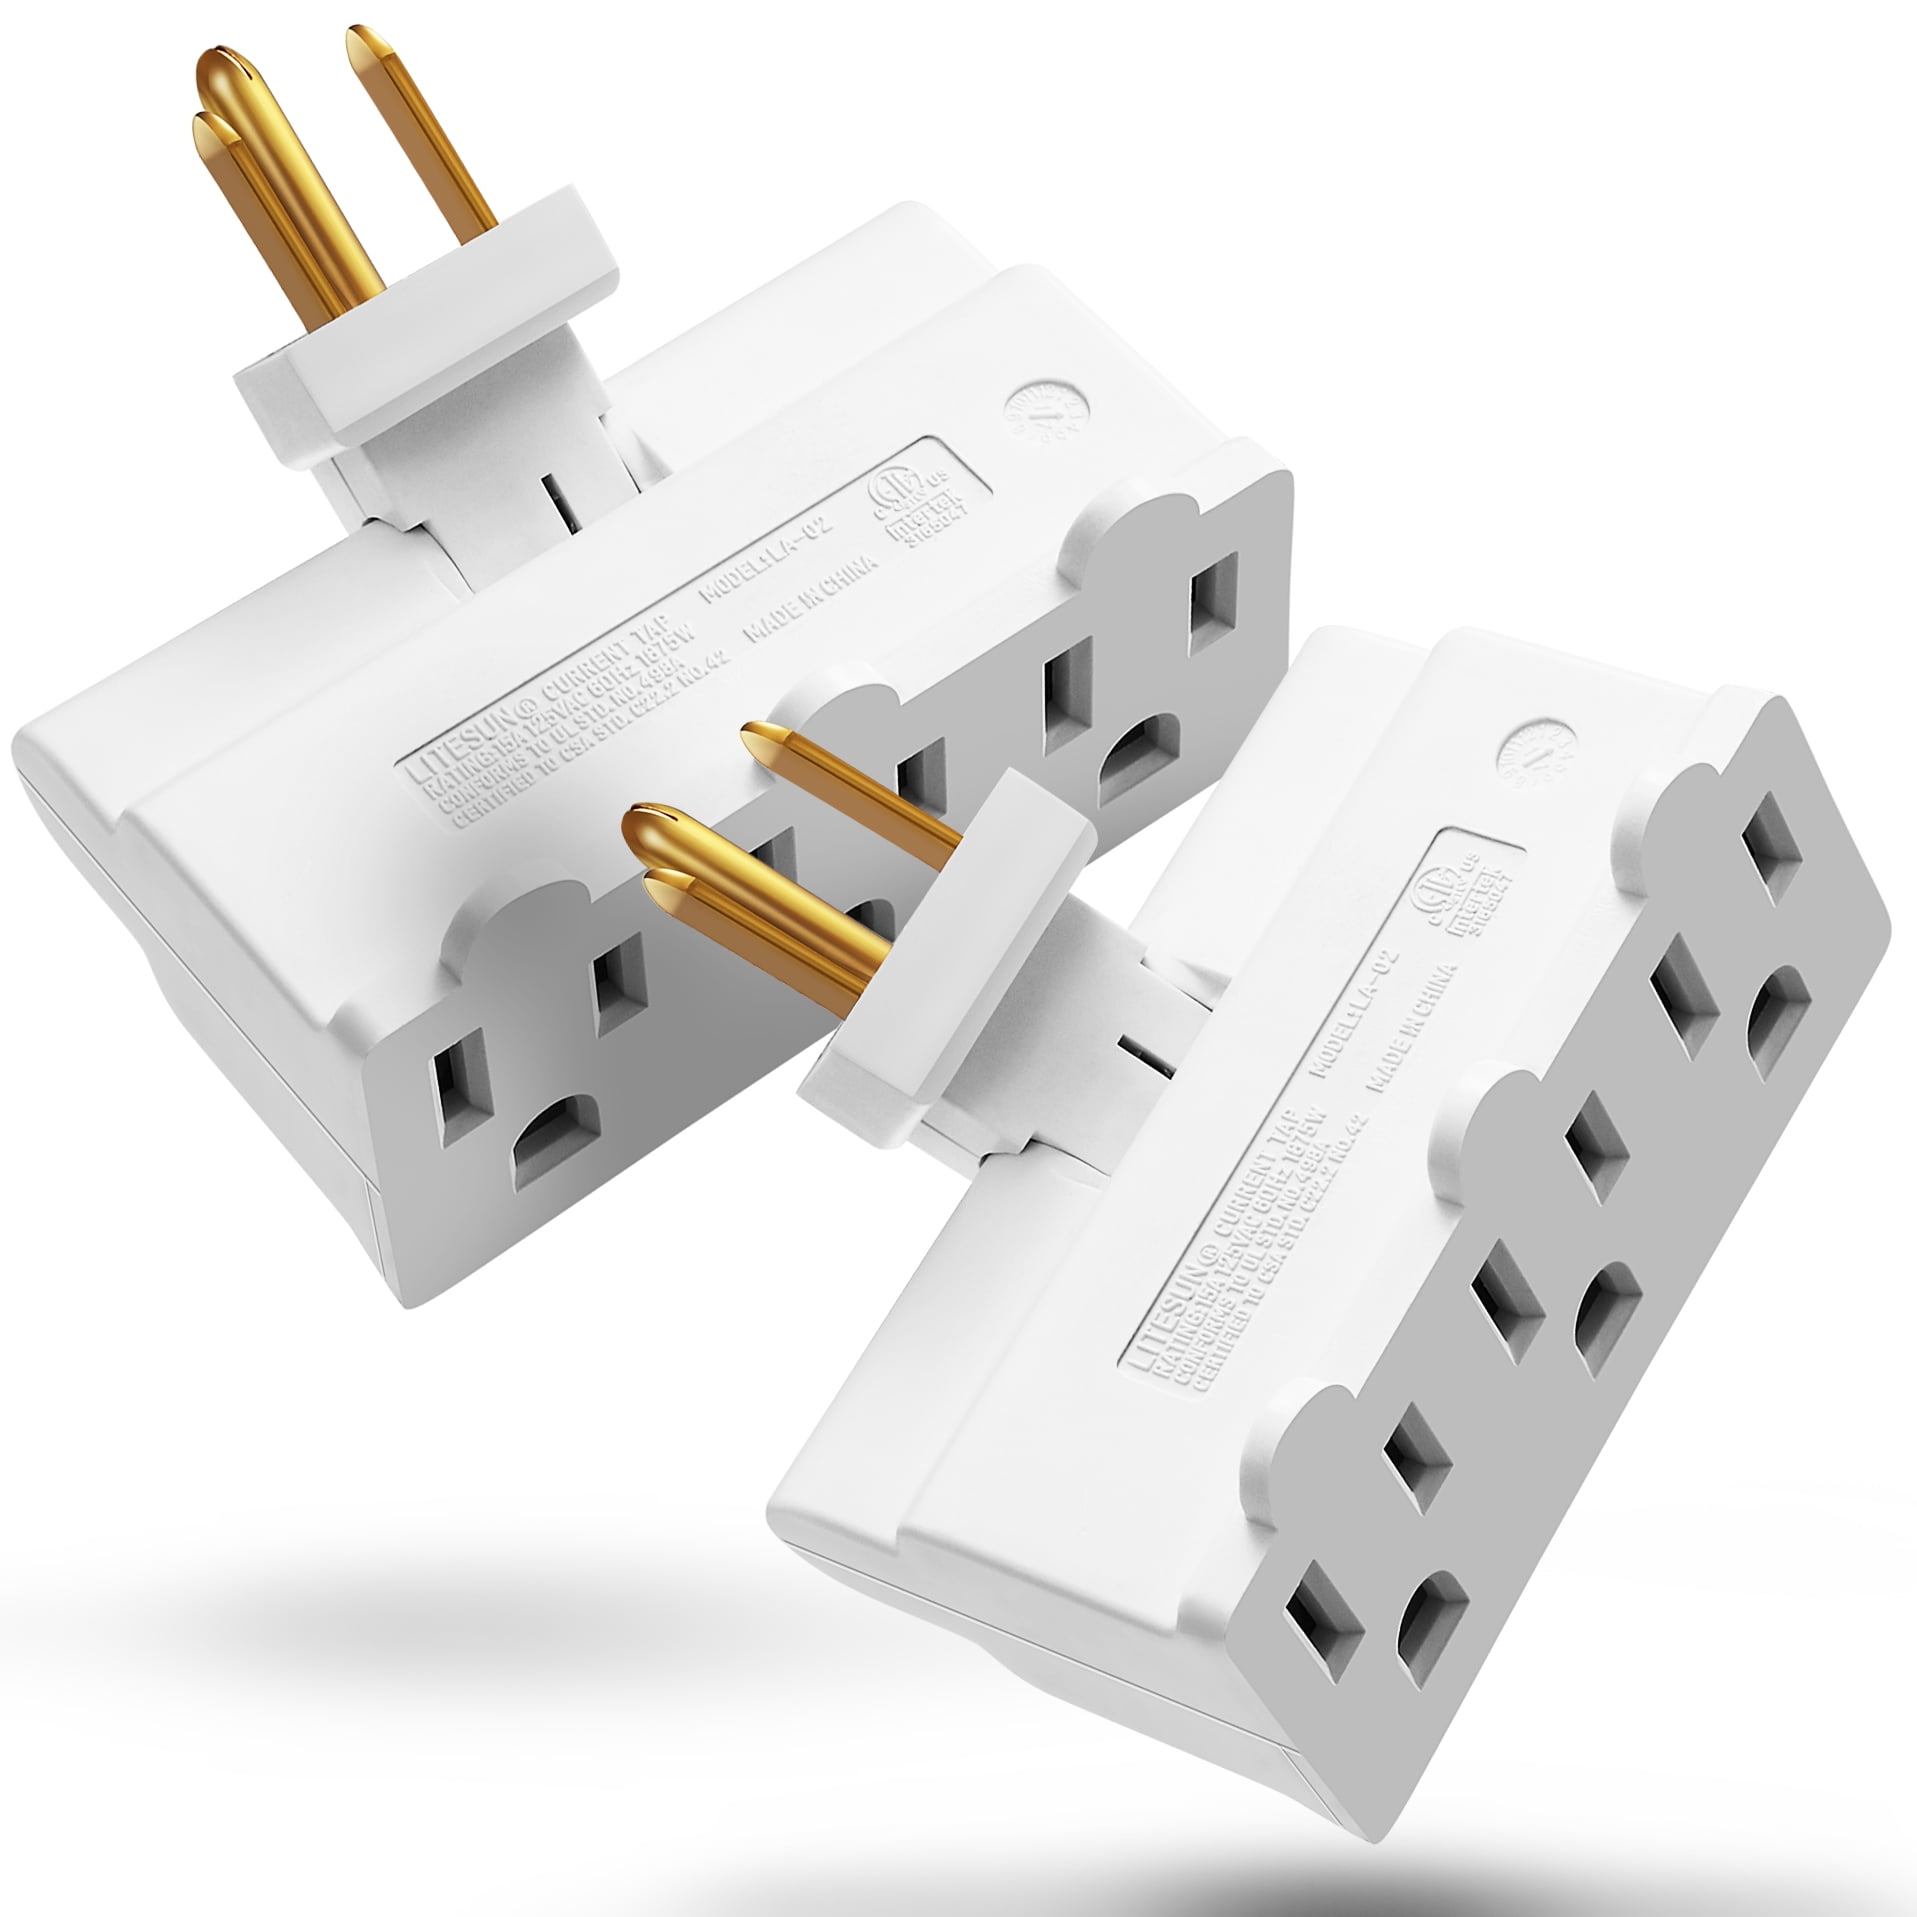 3 Outlet 3 Way 2-Prong Wall Tap Plug Adapter UL Grounded AC Power Socket 1PK NEW 